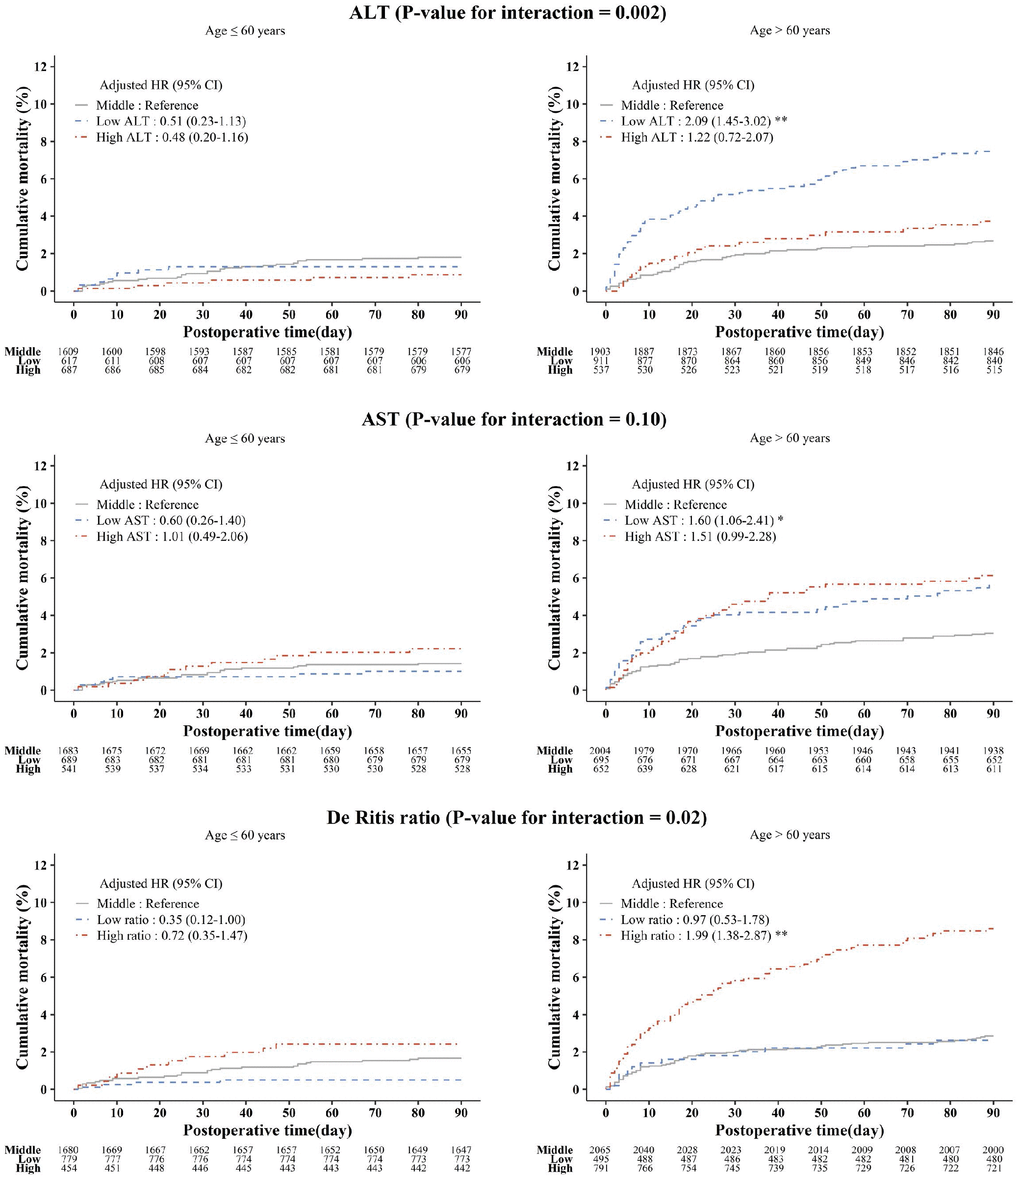 Kaplan-Meier estimated postoperative 90-day cumulative mortality and adjusted hazard ratios according to the ALT, AST, and De Ritis ratio groups stratified by age. Asterisks indicate the statistical significance. *P0.05, **P0.001. ALT: alanine aminotransferase; AST: aspartate aminotransferase; HR: hazard ratio; CI: confidence interval.